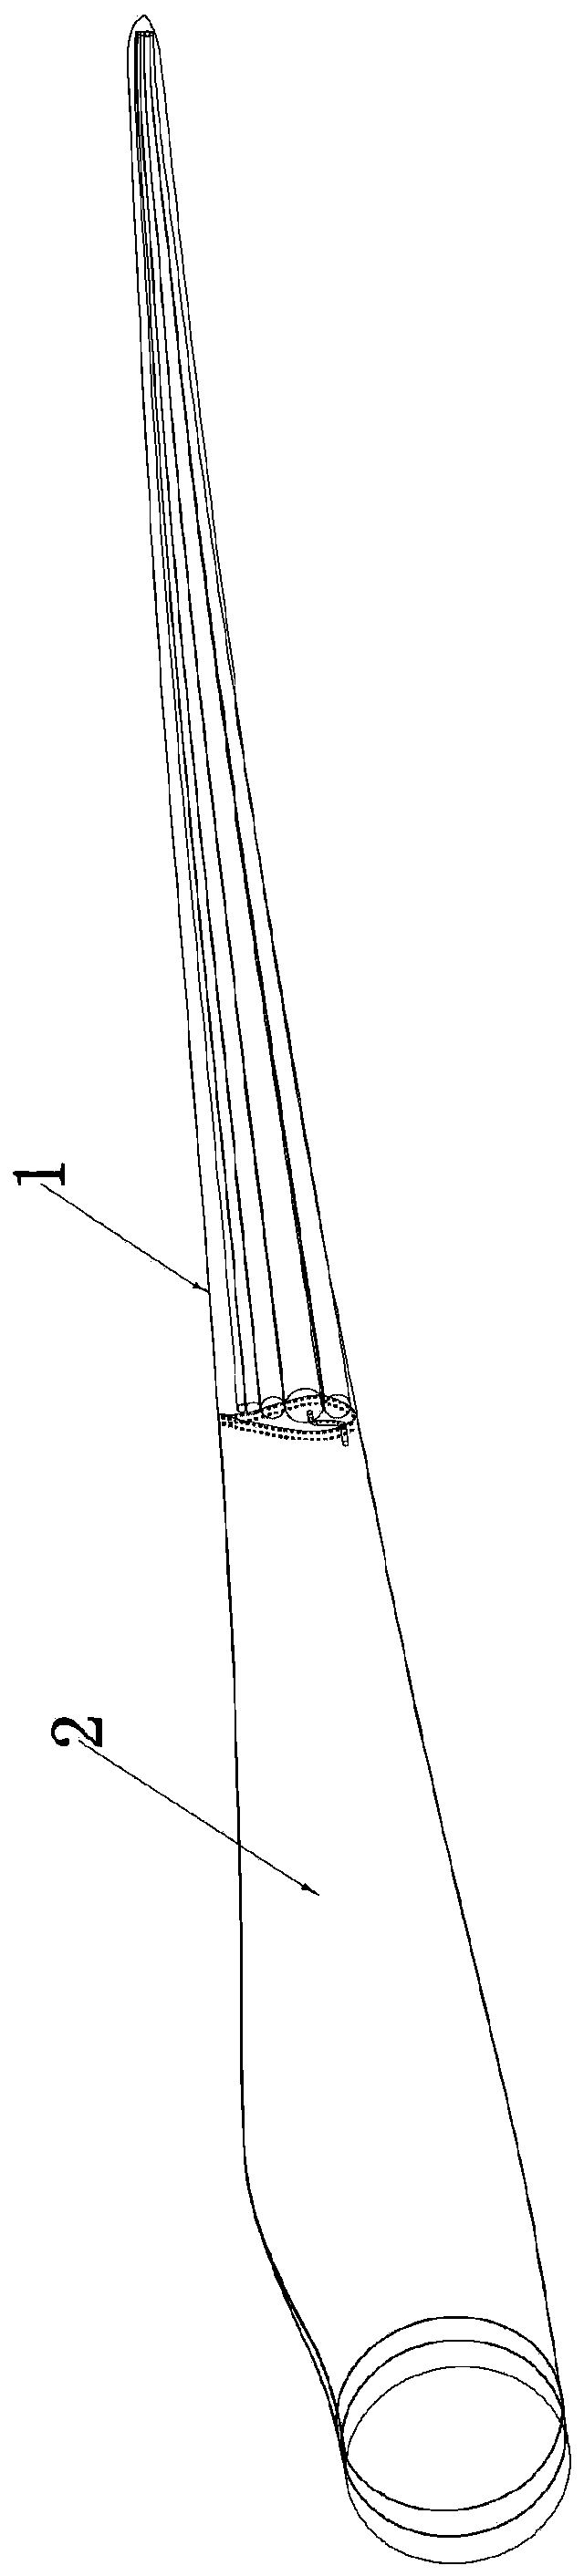 Inflatable blade structure of wind driven generator